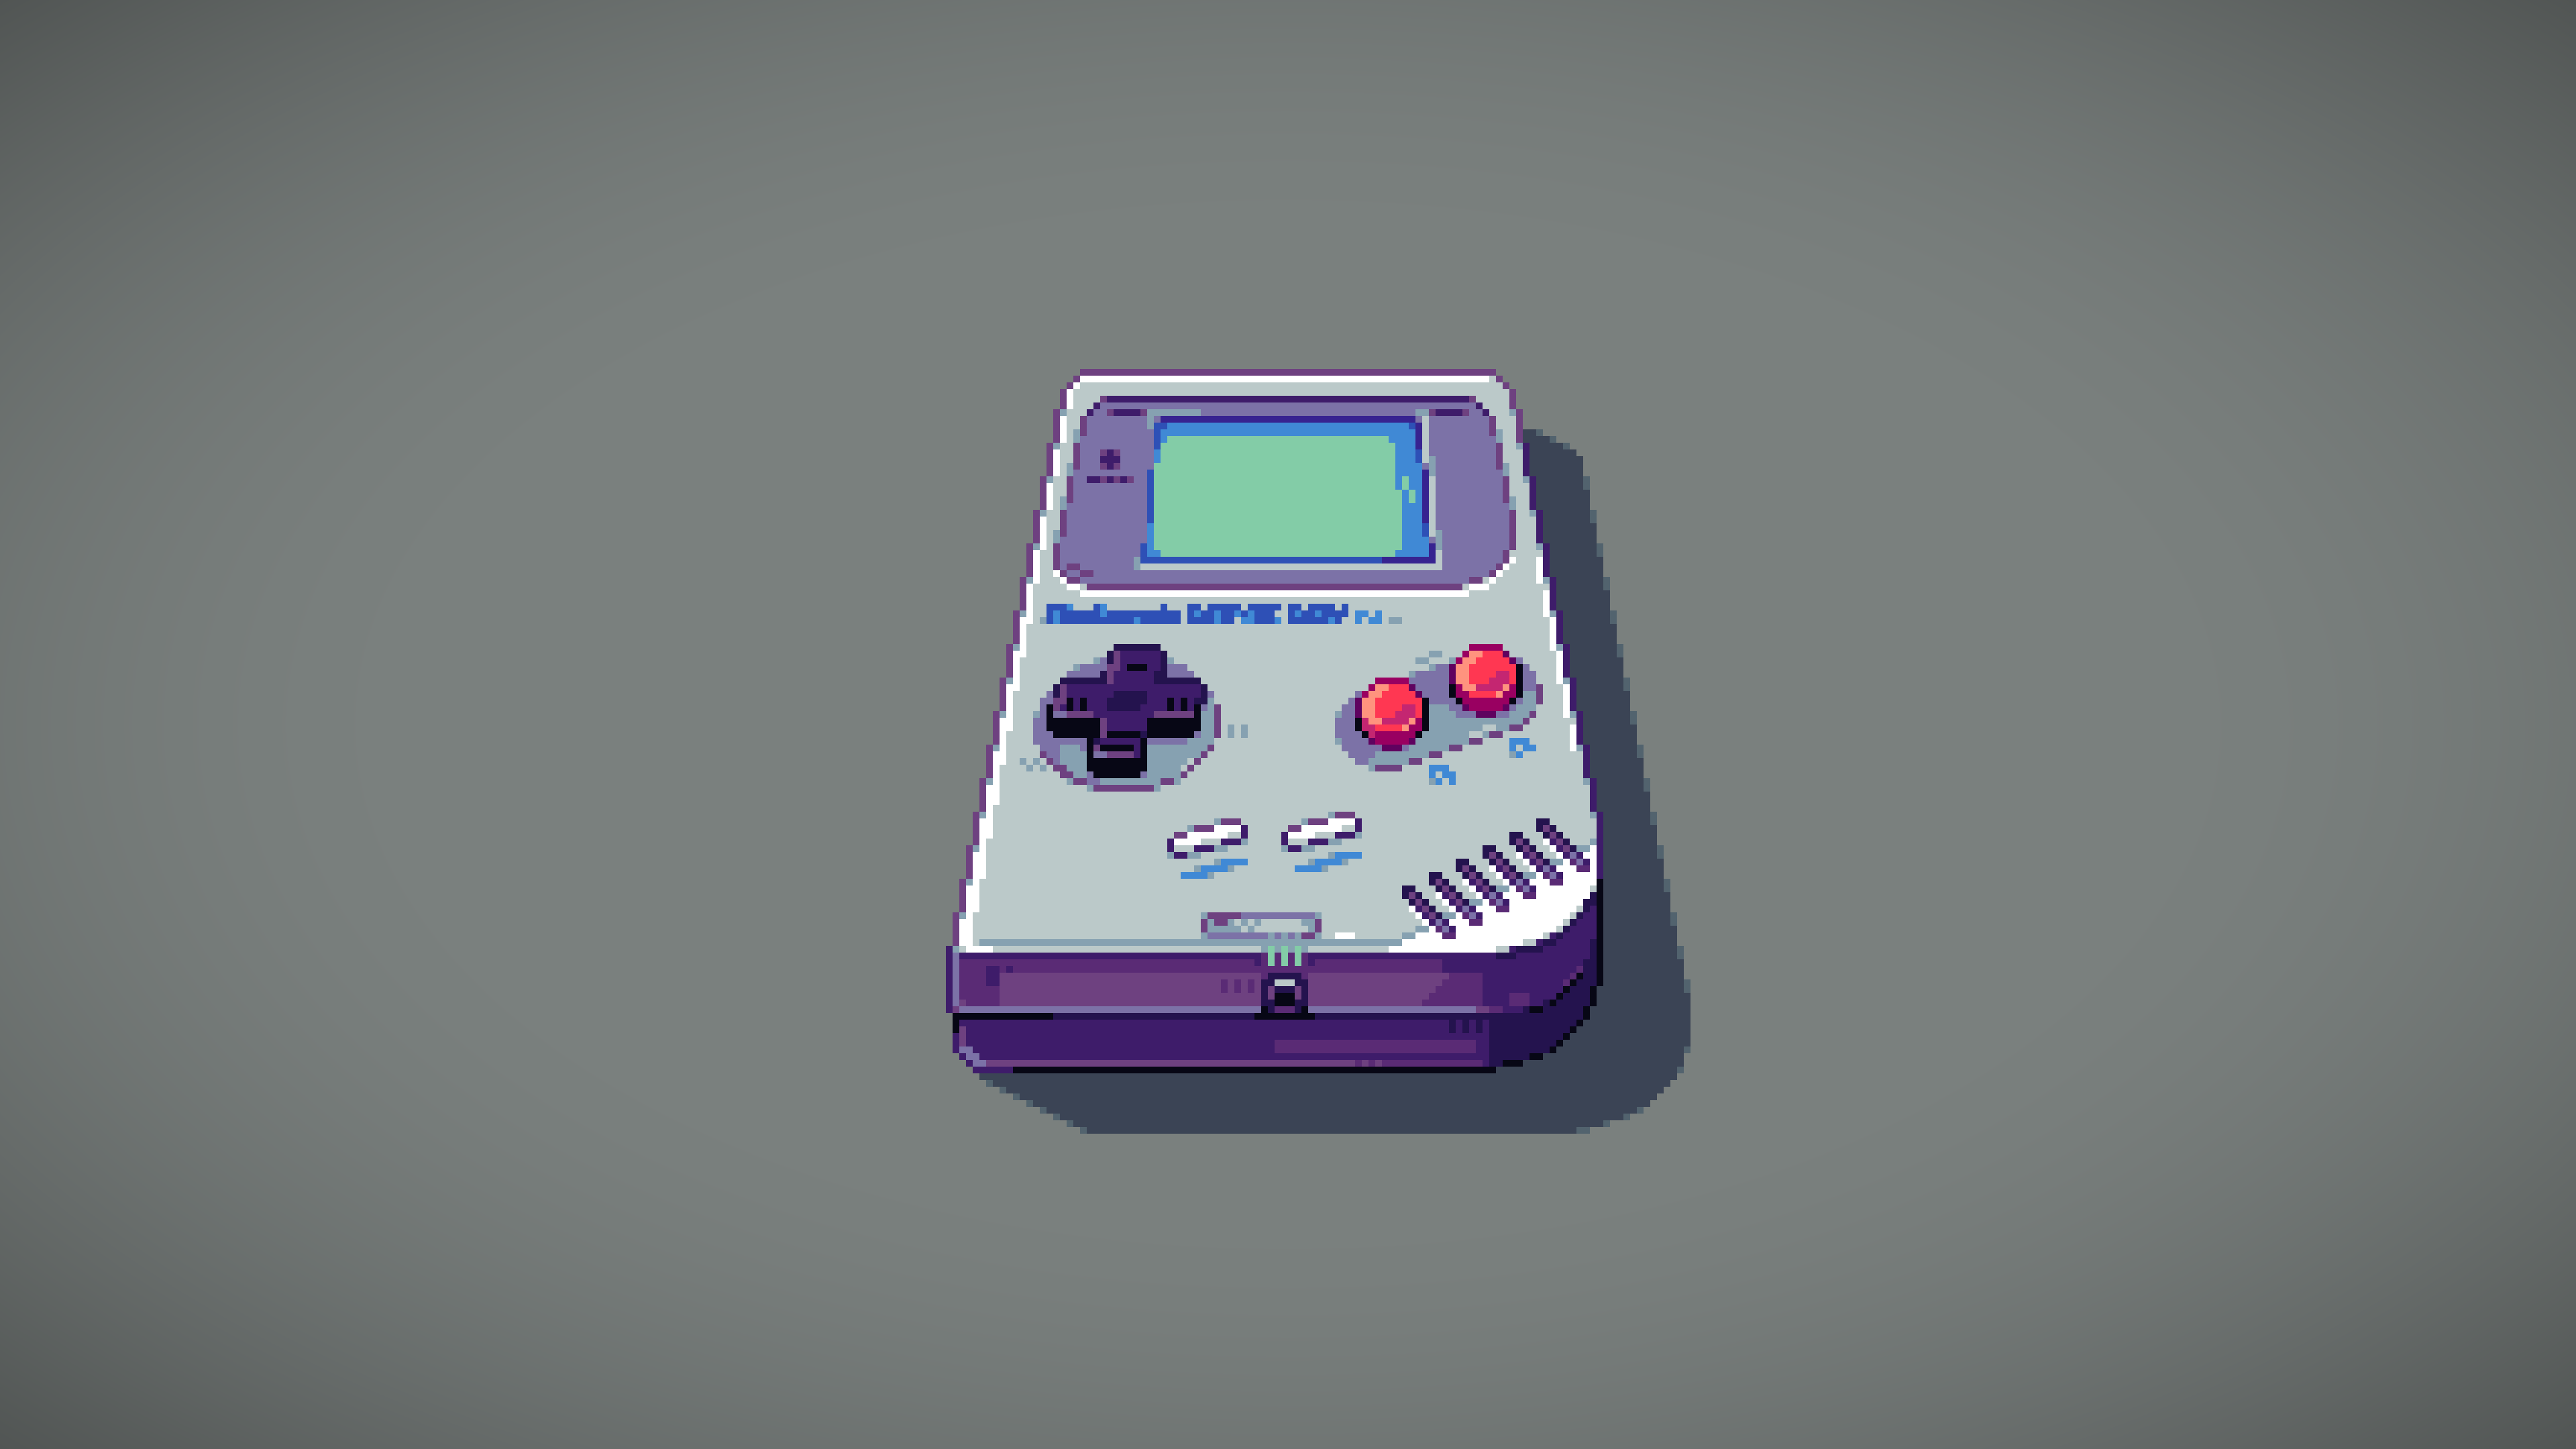 General 3840x2160 GameBoy Nintendo gray background buttons screens retro games pixelated pixel art simple background minimalism